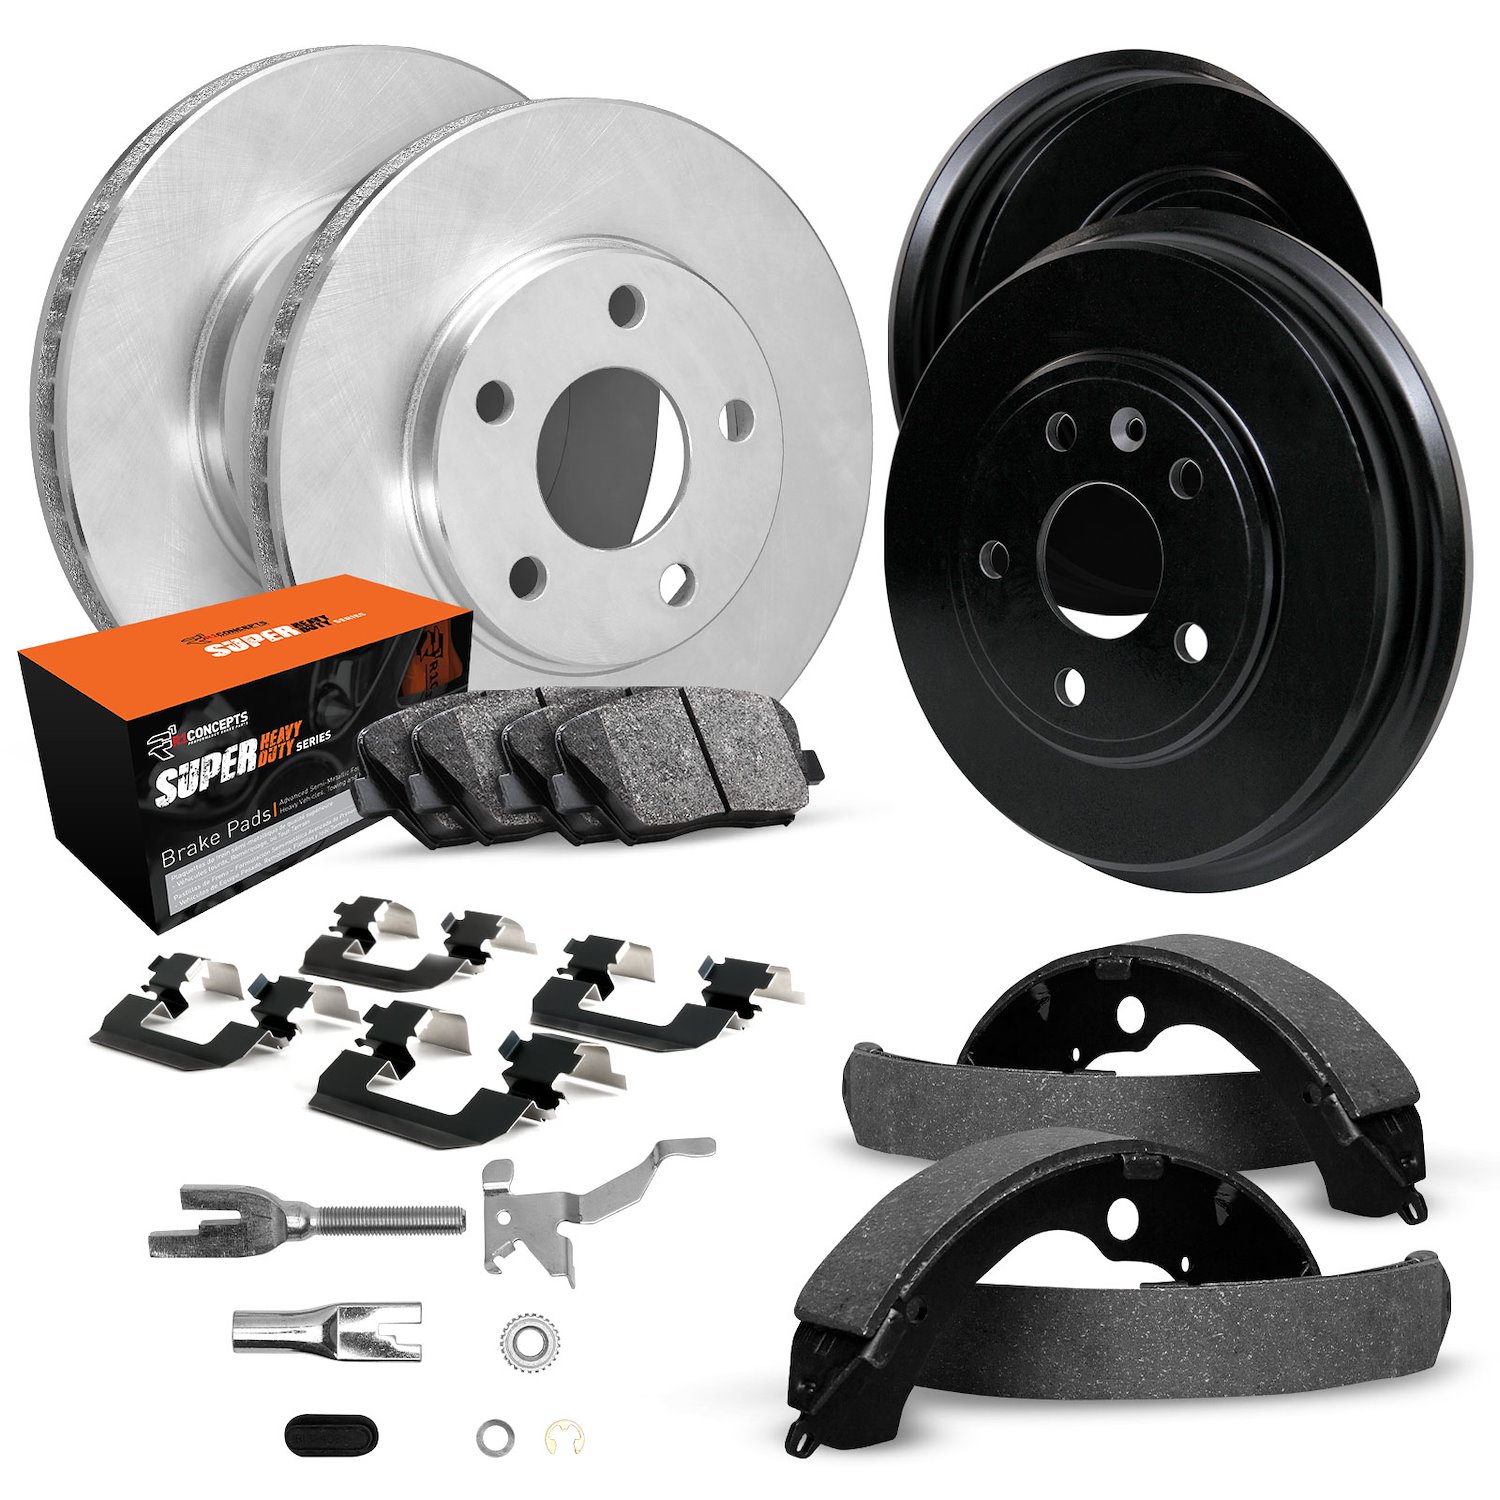 E-Line Blank Brake Rotor & Drum Set w/Super-Duty Pads, Shoes, Hardware, & Adjusters, 1993-1999 GM, Position: Front & Rear